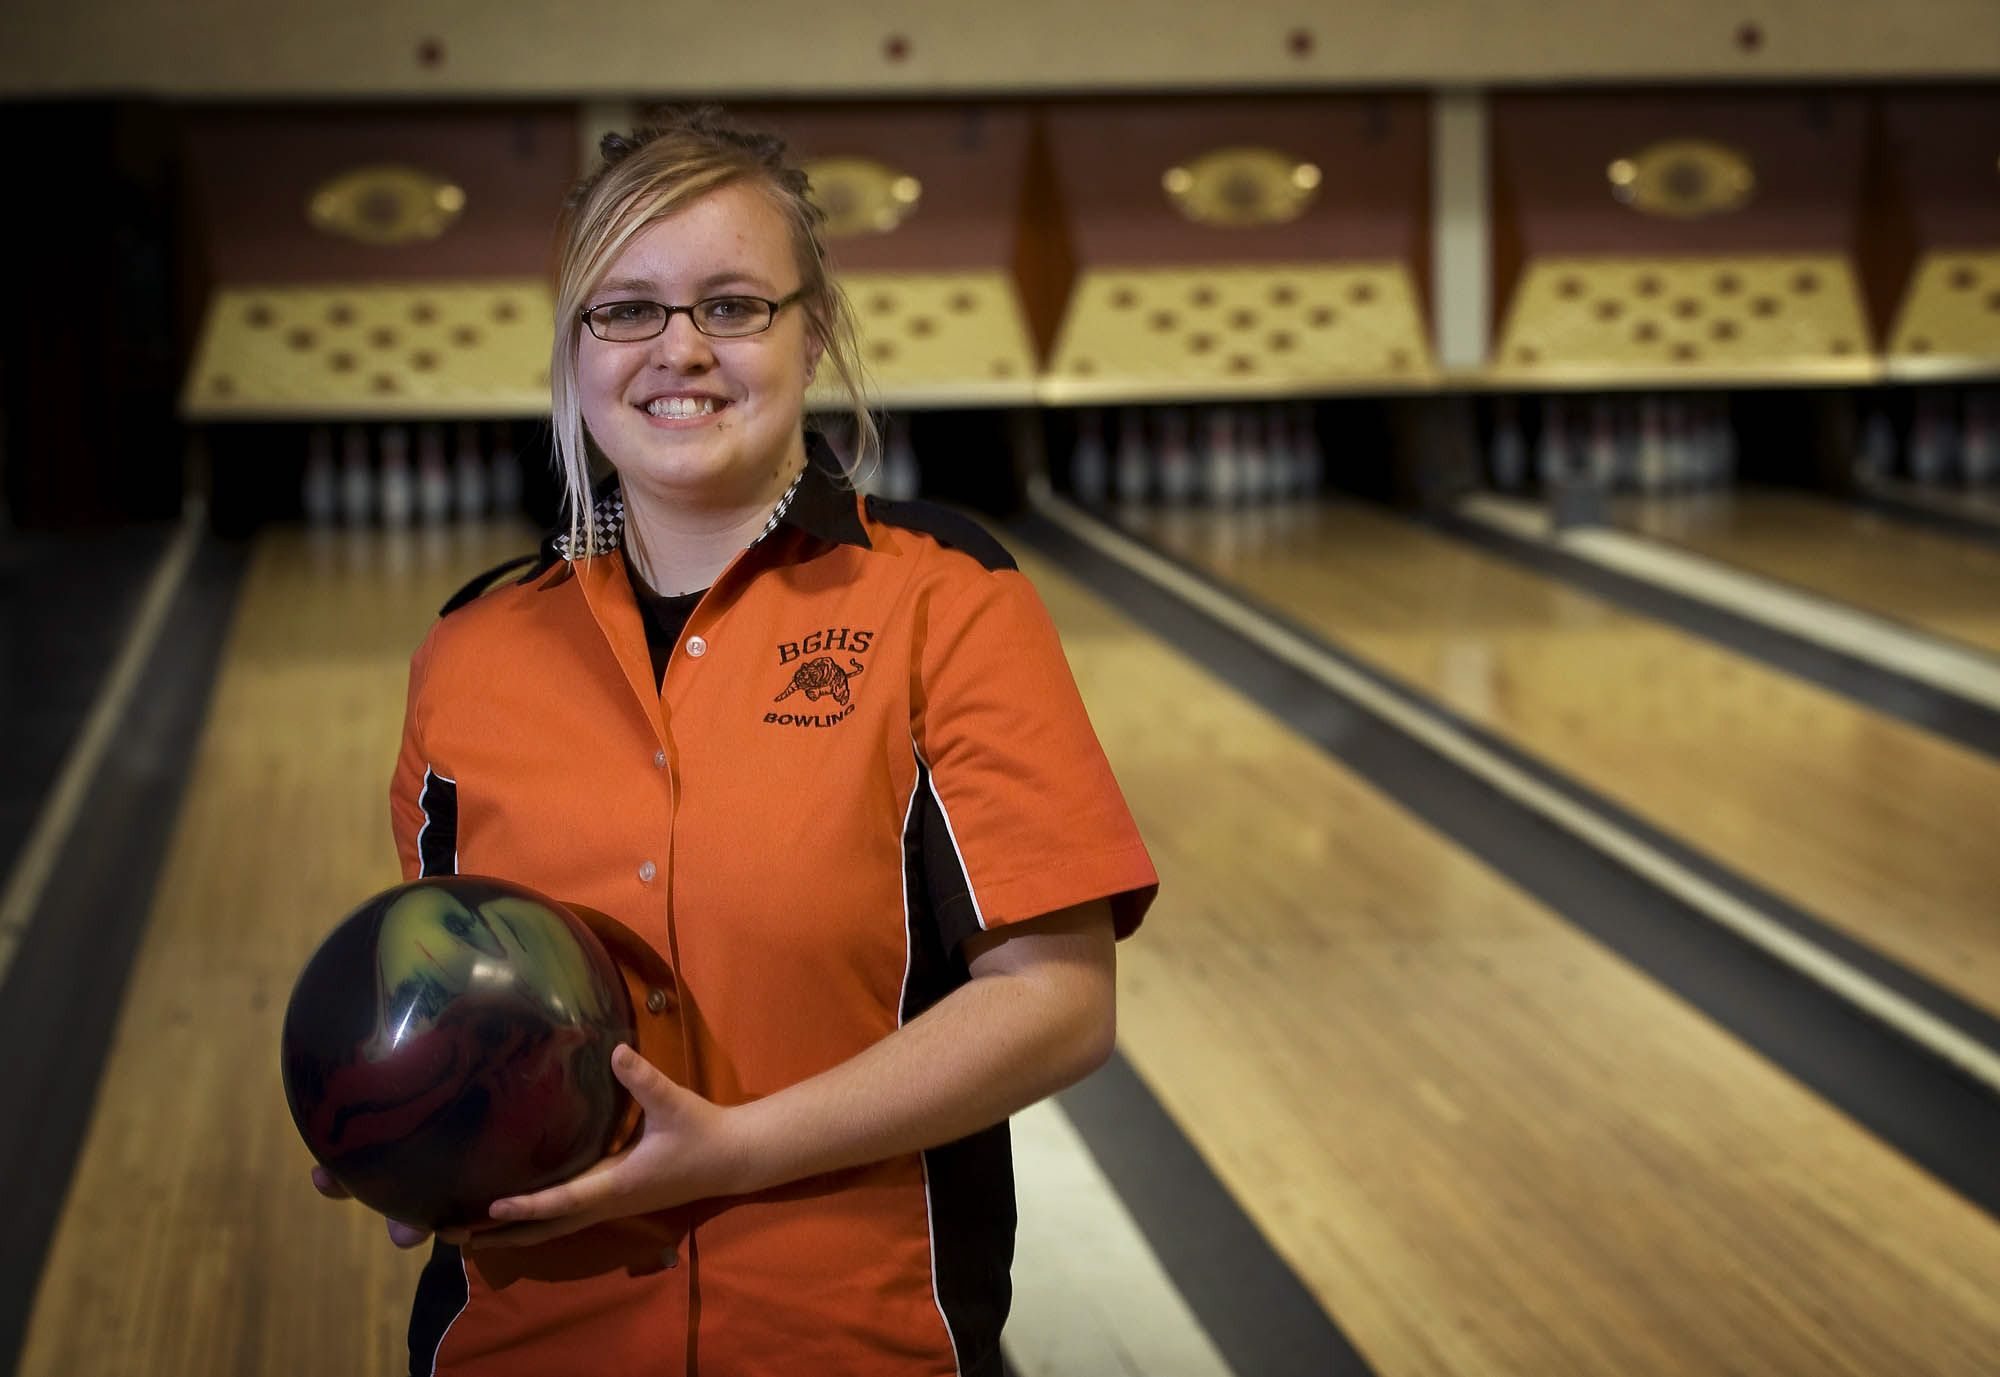 Wylicia Faley carries a 4.0 grade-point average at Battle Ground High School while devoting much of her time to bowling.